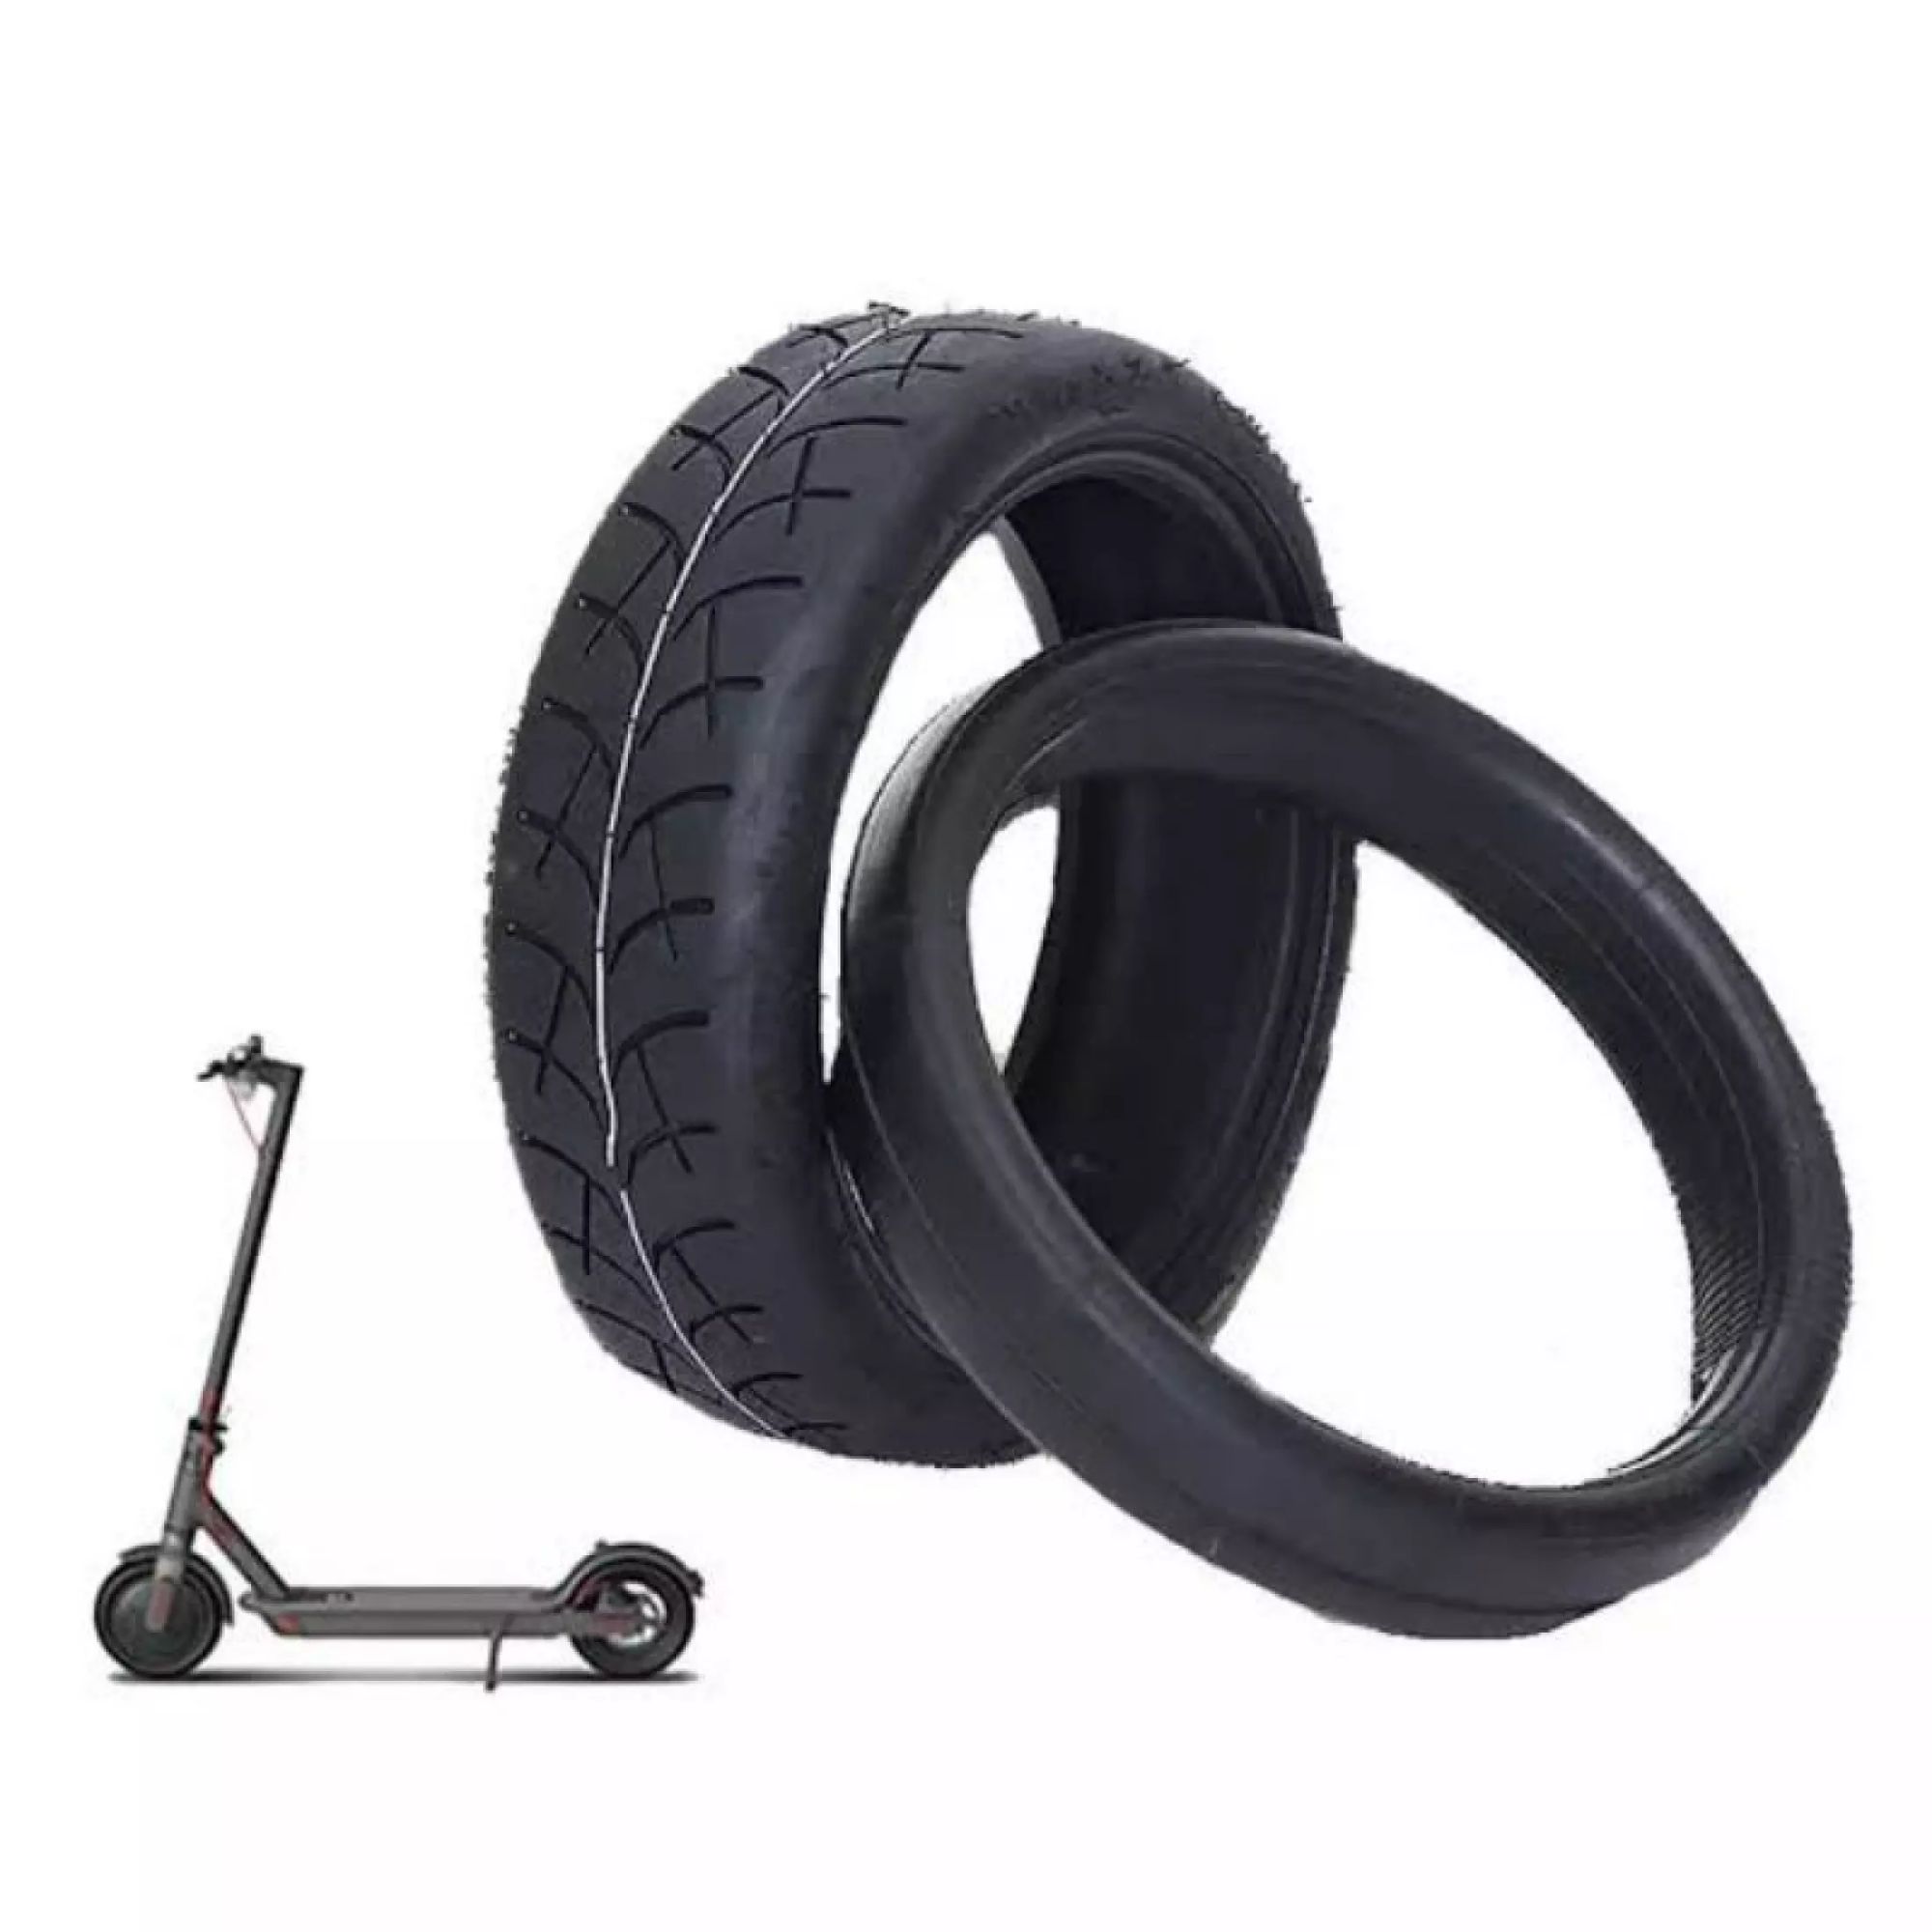 Liseng 8 1/2 Replacement Wheels Outer and Inner Tyres Black 2 M365 Electric Scooter Tyre,8.5 Inch Scooter Tyre Wheel Inner and Outer Tyres for Mijia M365 Electric Scooter